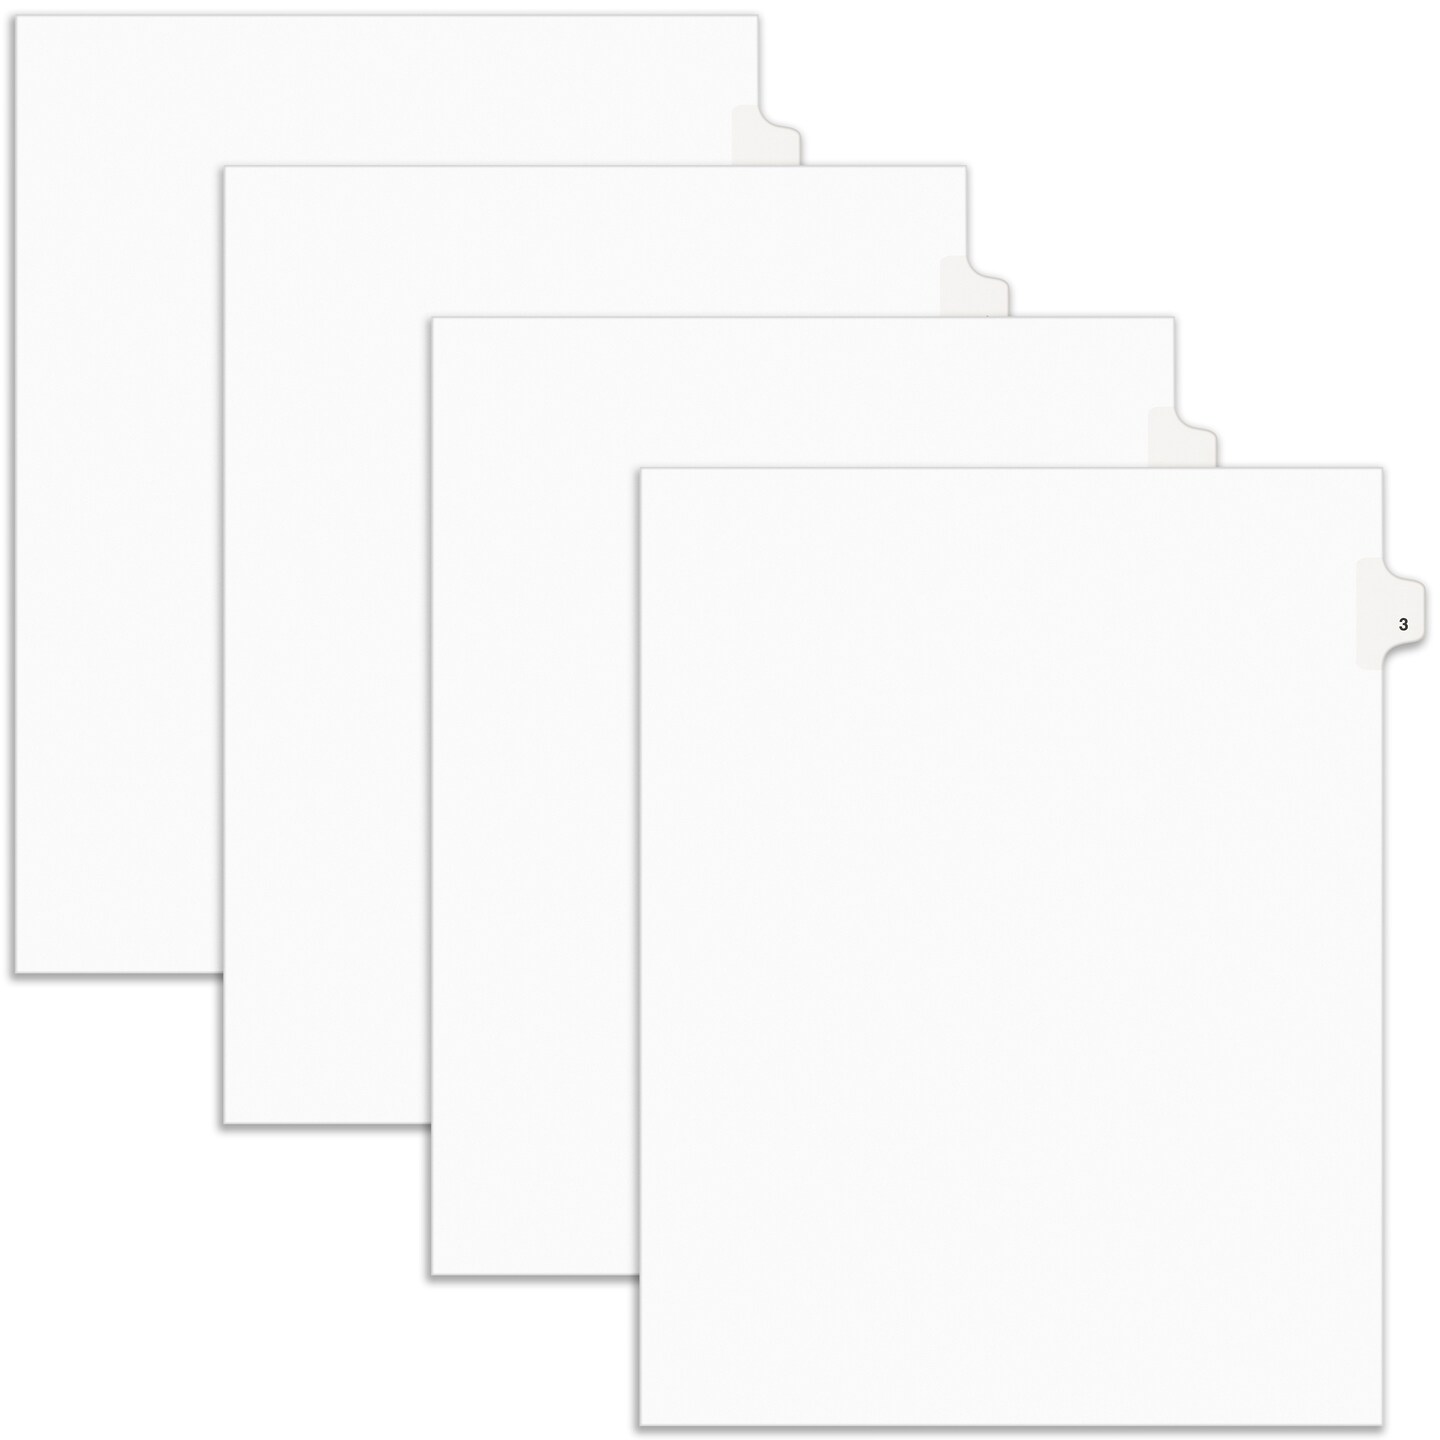 Avery Legal Exhibit Binder Dividers, Preprinted No. 3 Side Tabs, Unpunched Letter Size, 25 Tabs per Set, 4 Packs, 100 Tabs Total (11912)